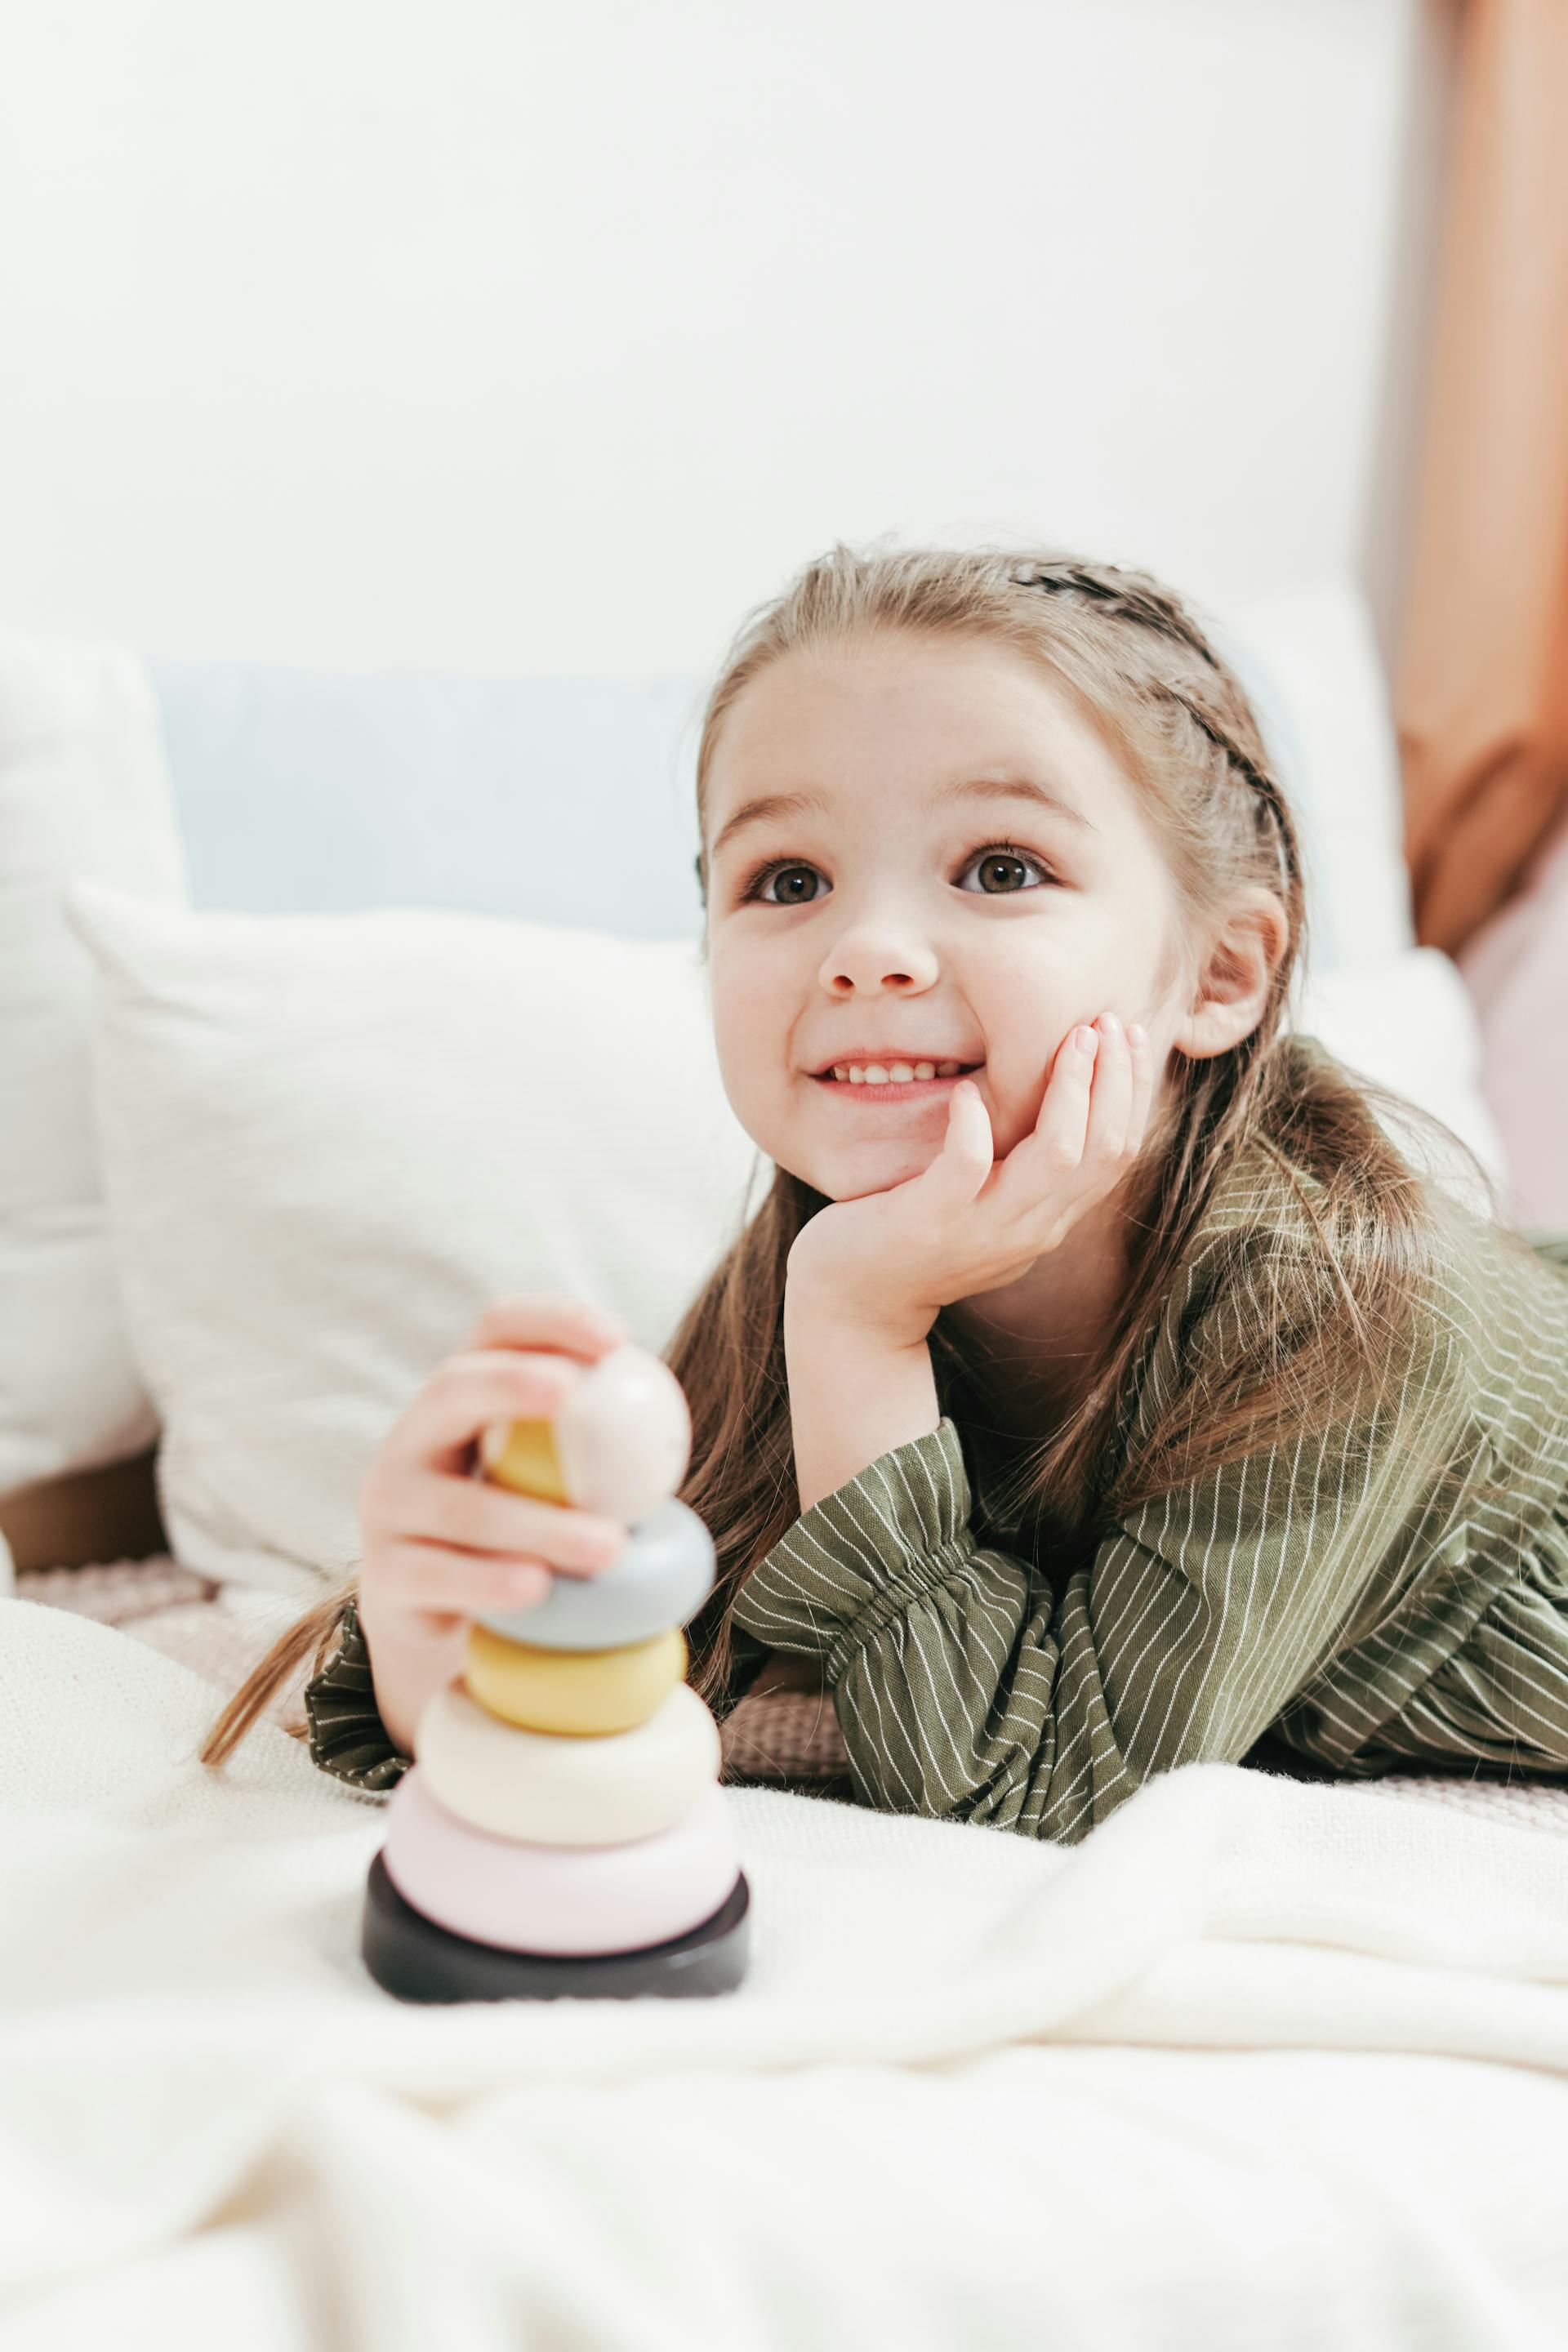 A happy little girl playing with her toys | Source: Pexels